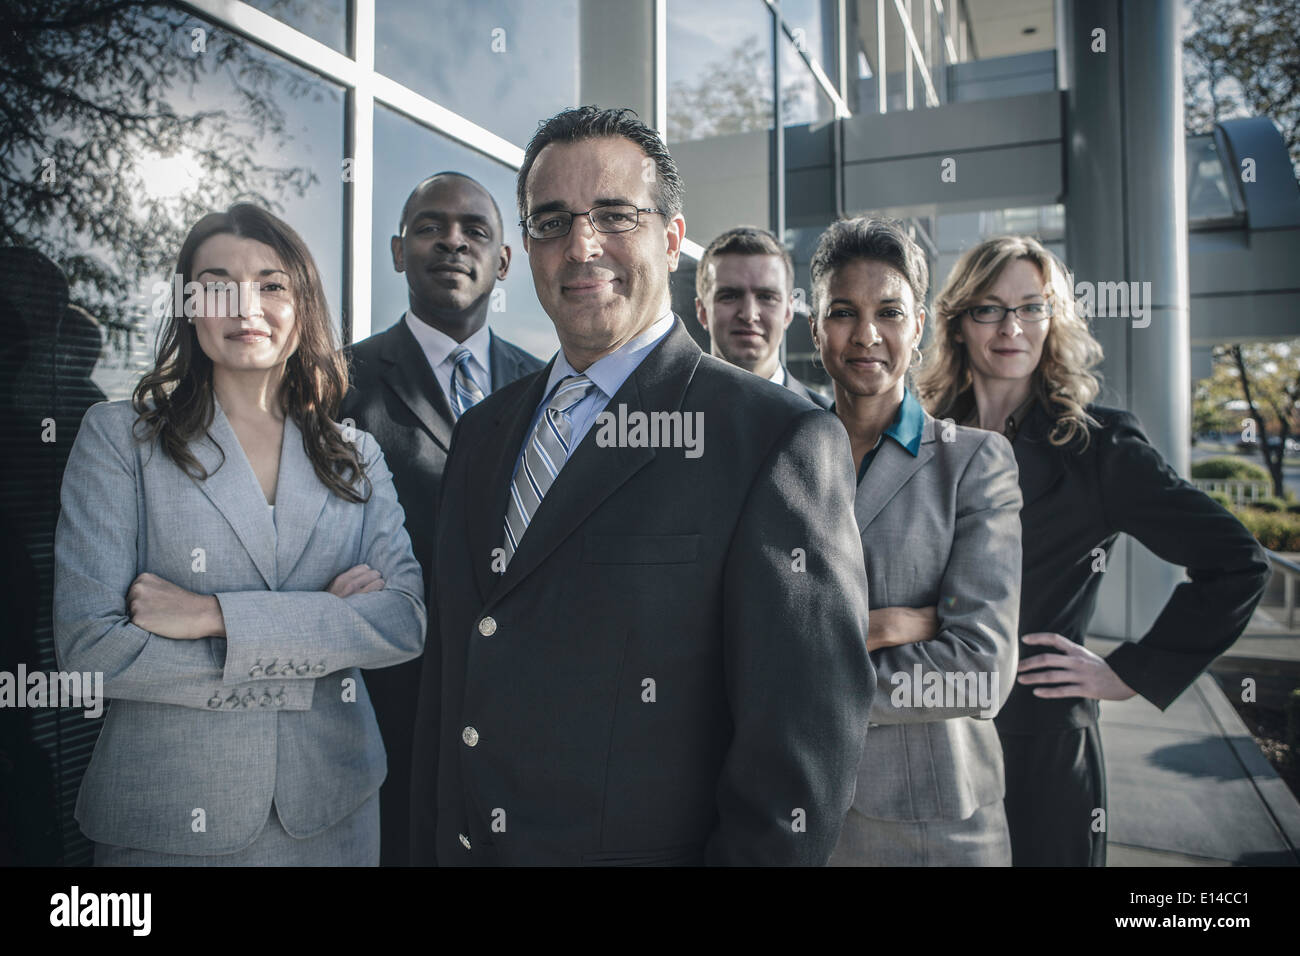 Business people smiling outside office building Stock Photo